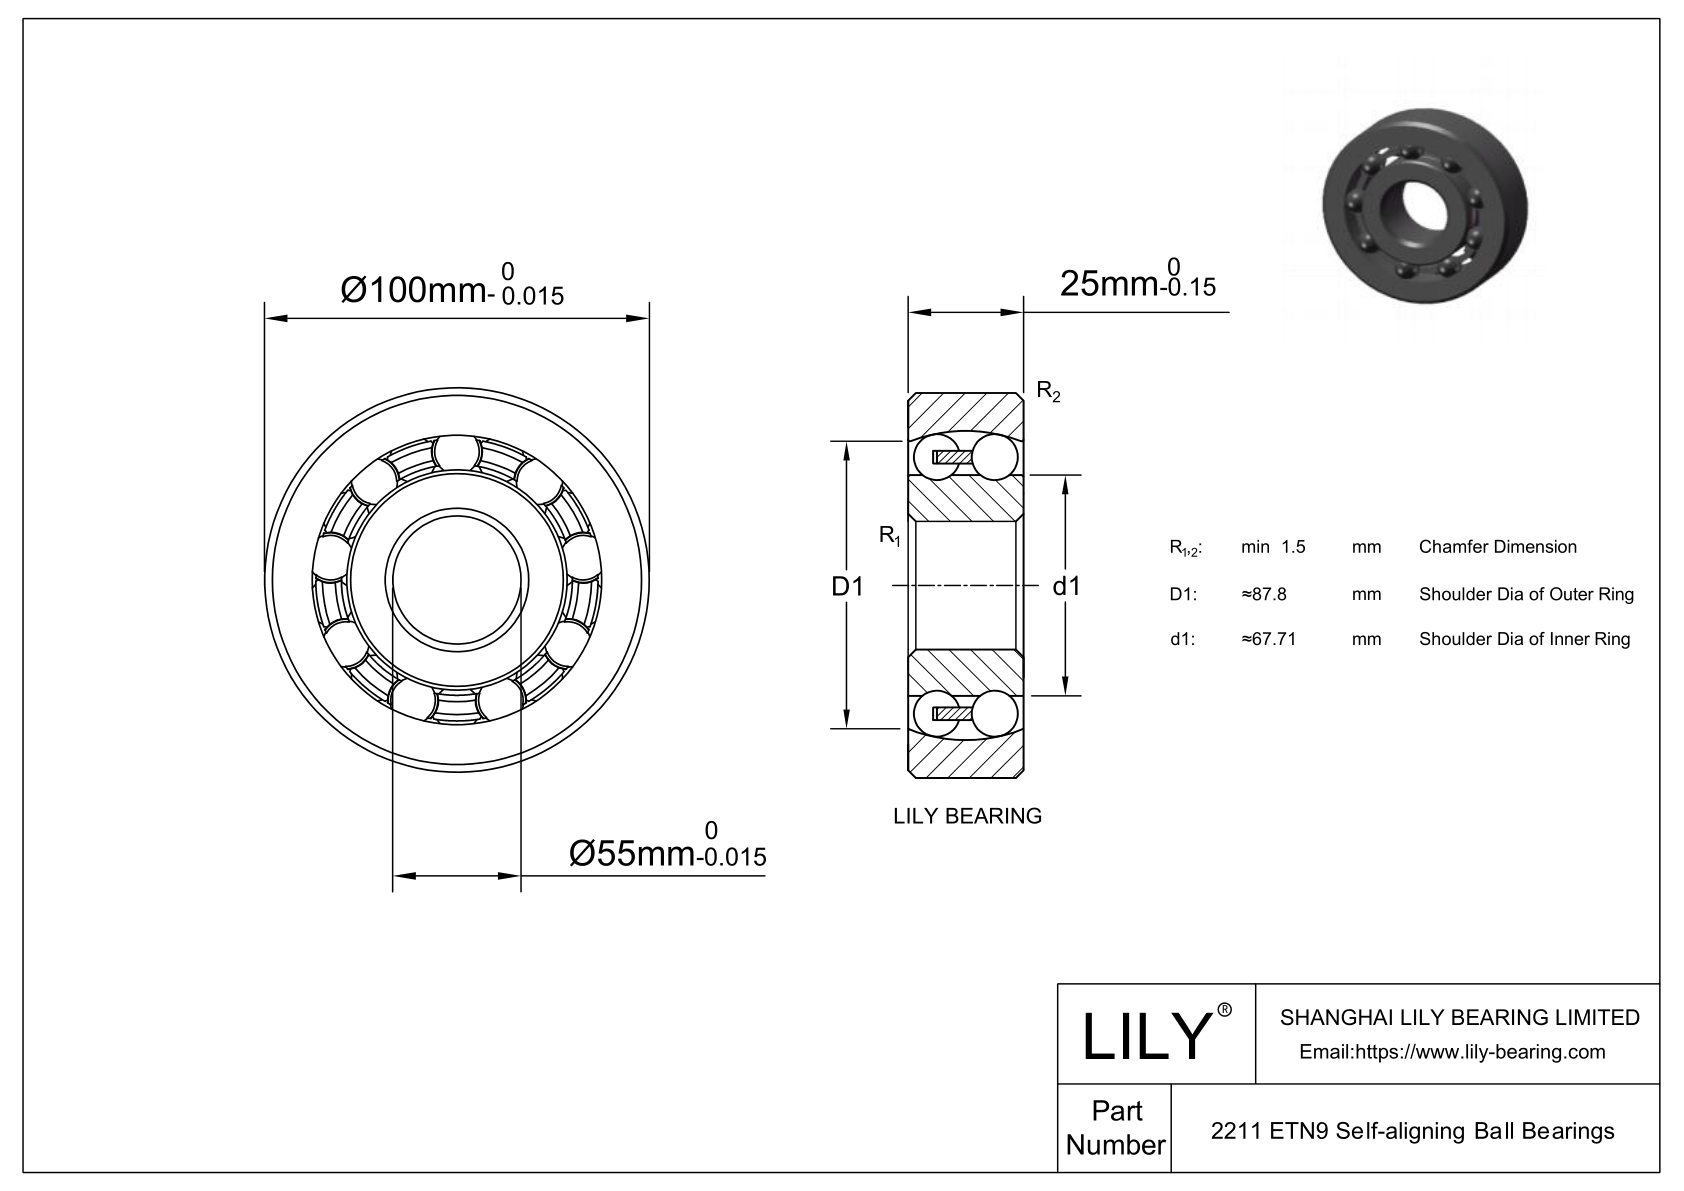 S2211 ETN9 Stainless Steel Self Aligning Ball Bearings cad drawing